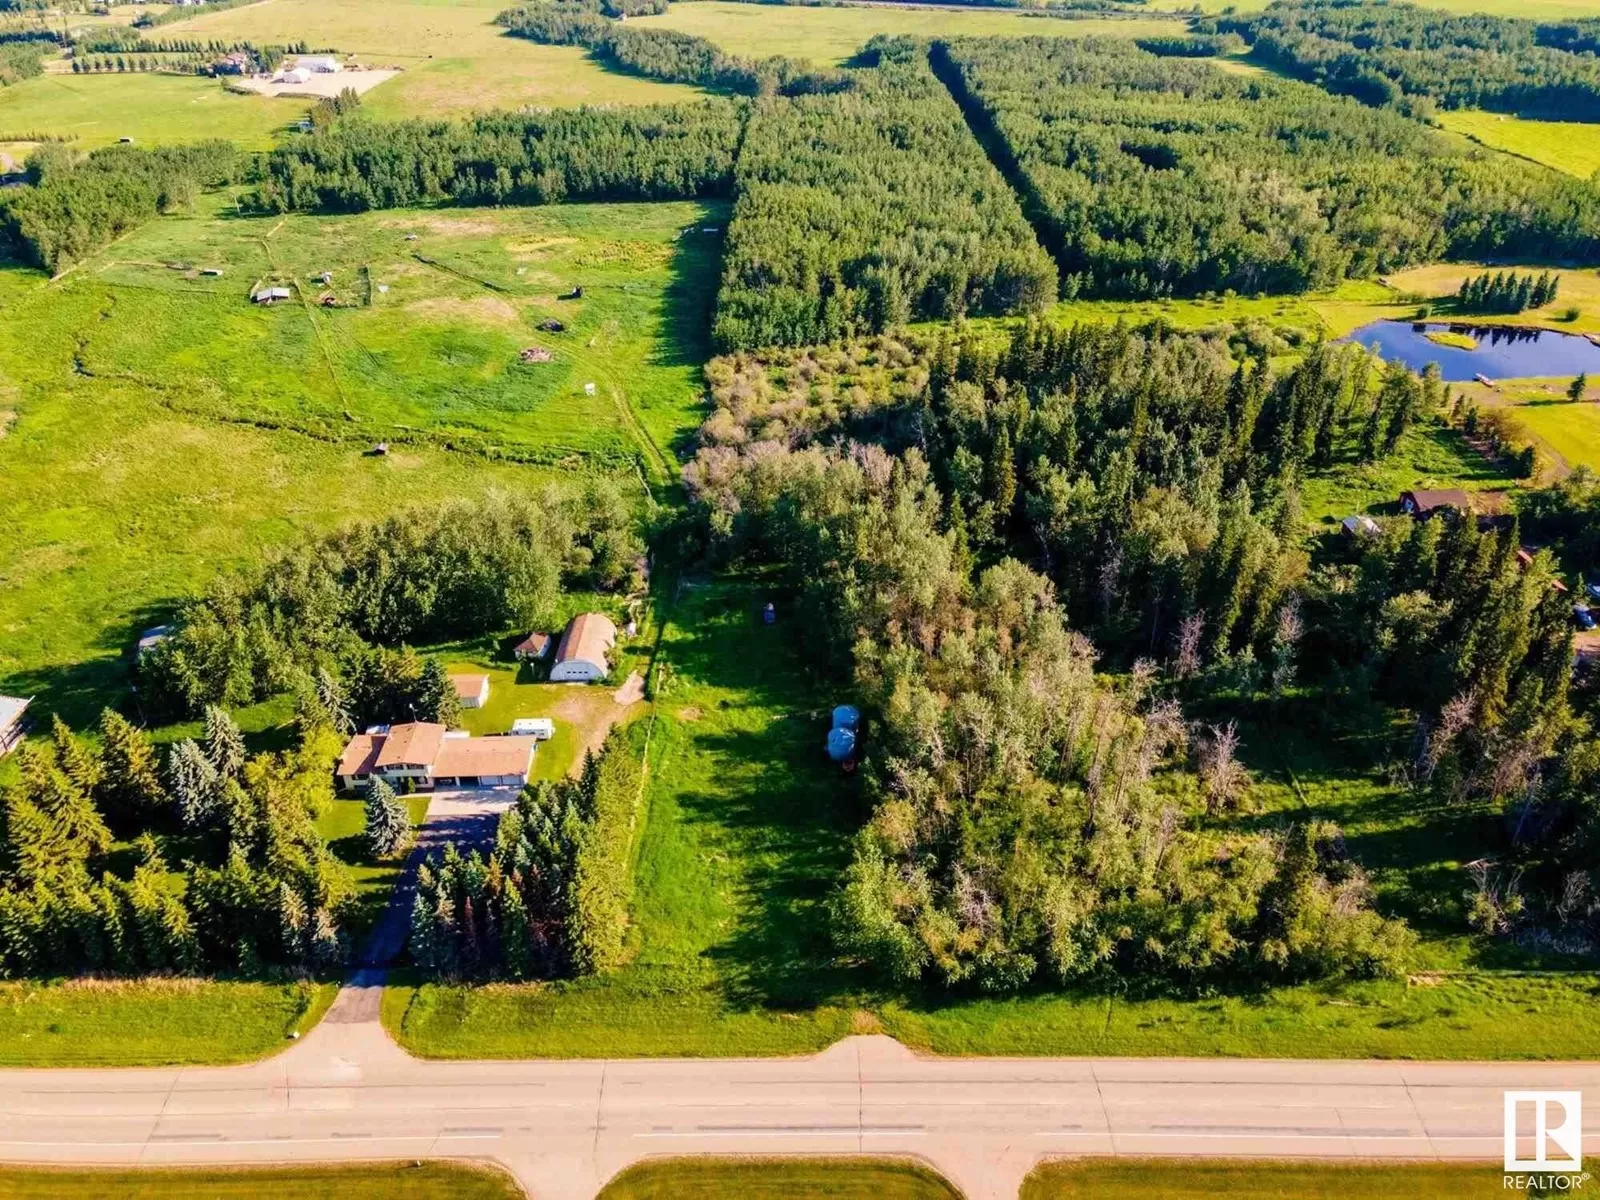 No Building for rent: Wye Road & Range Road 220, Rural Strathcona County, Alberta T8E 2J2